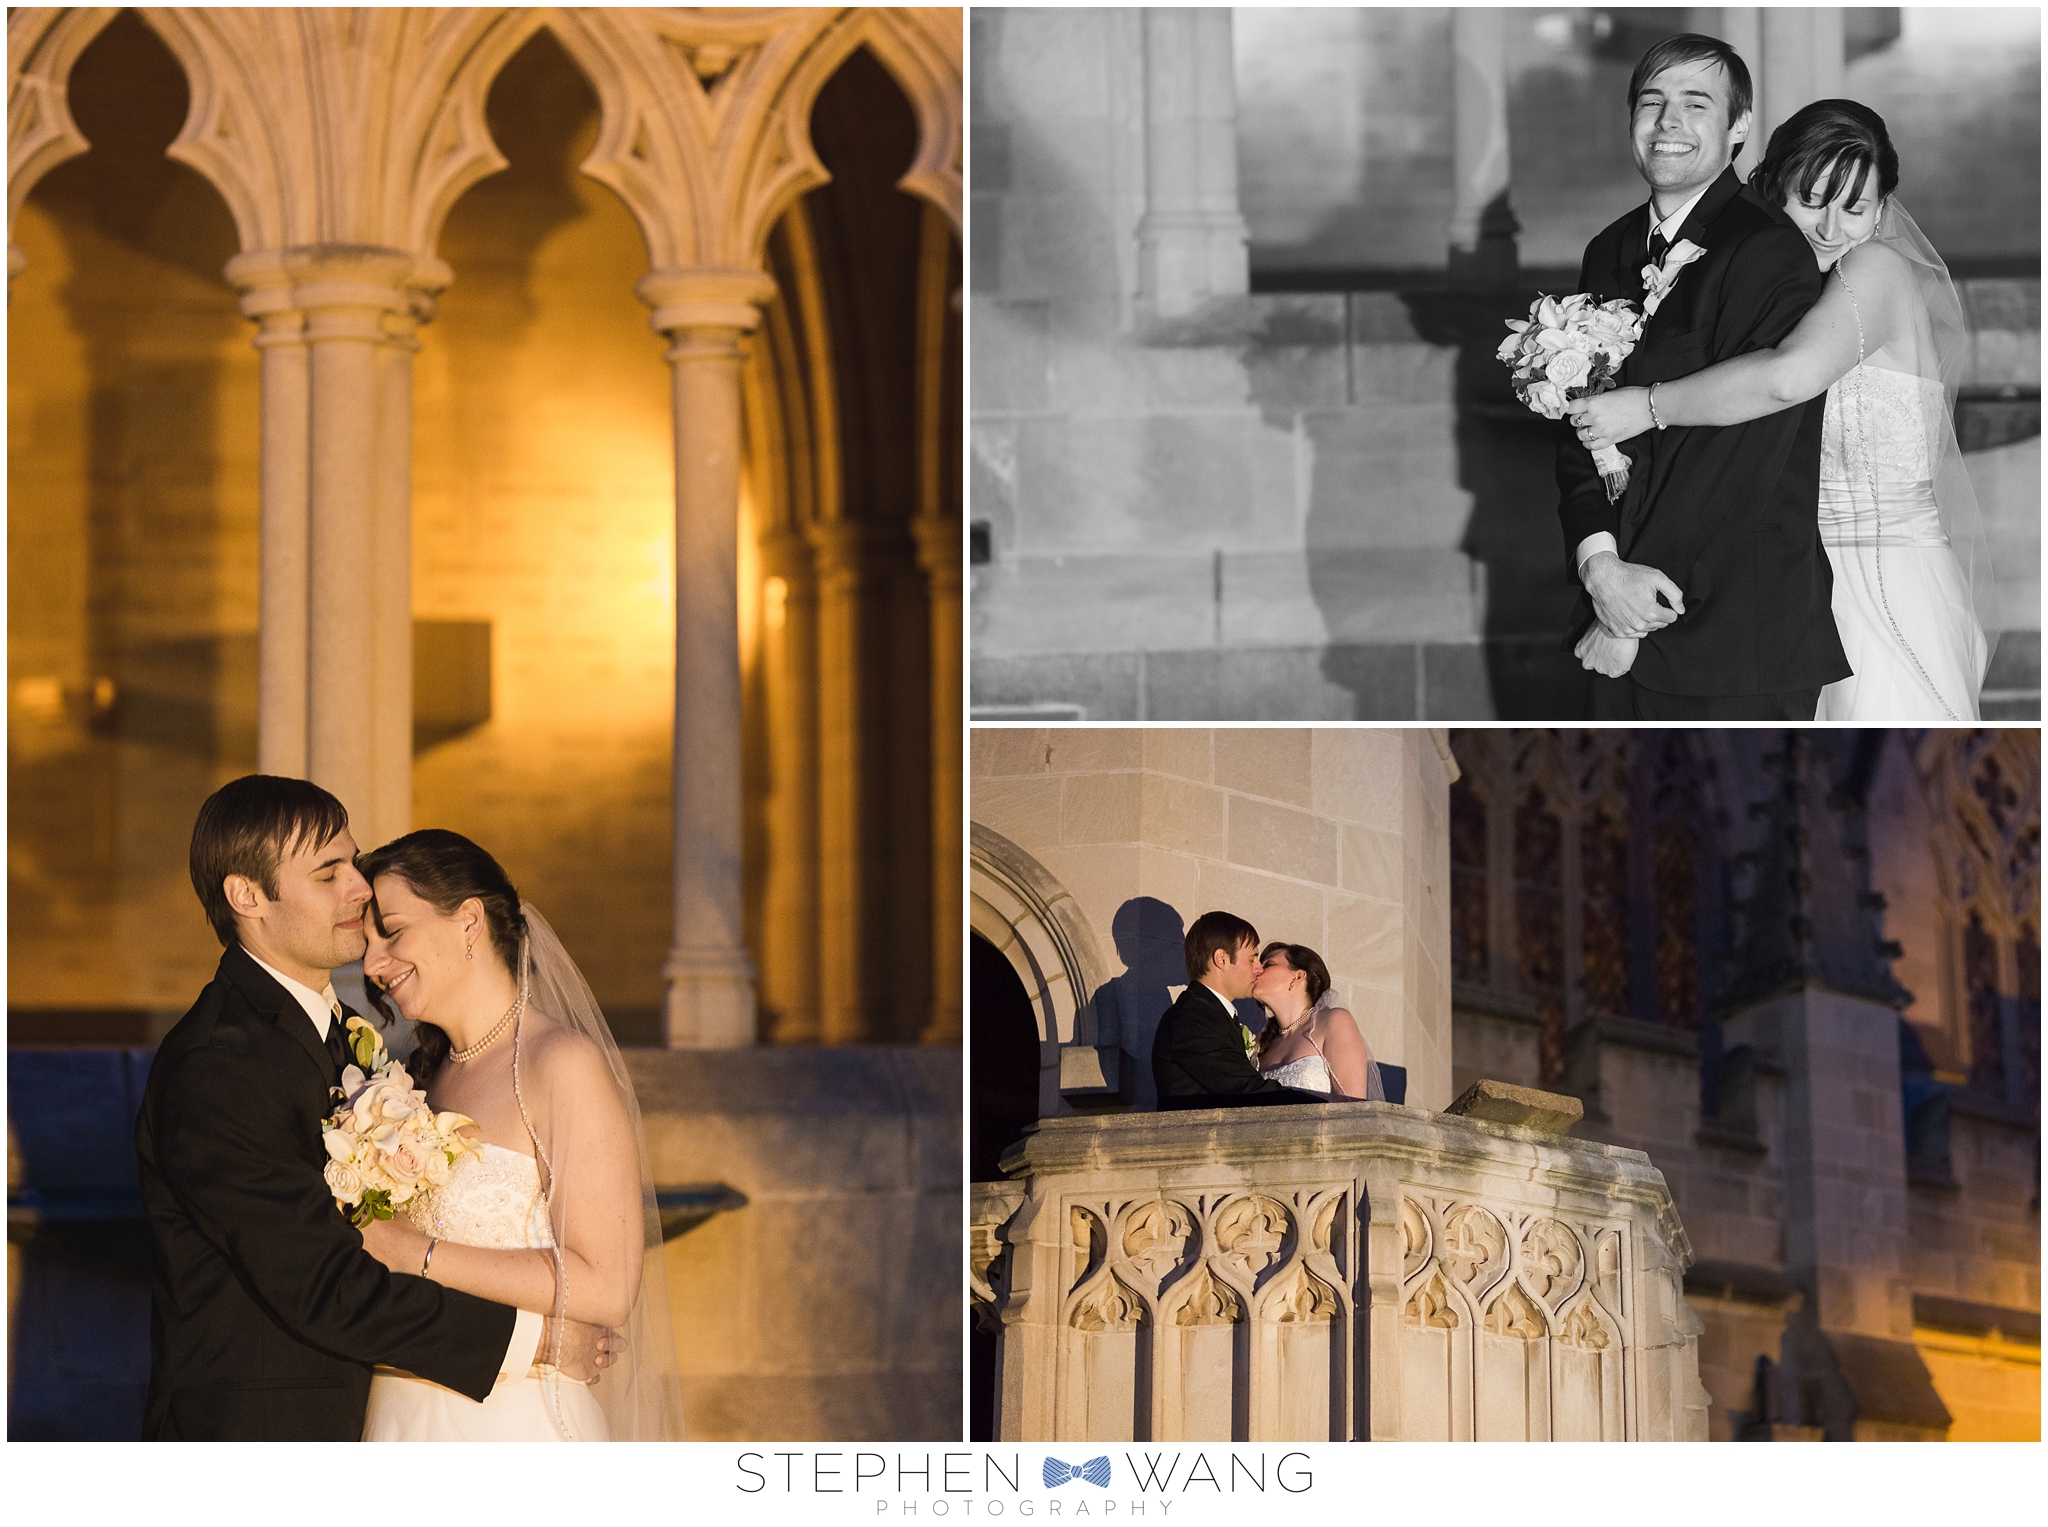 Stephen Wang Photography Wedding Connecticut CT Belle Terrace Avon Old Farms New England Wedding New Haven-11-17_0018.jpg